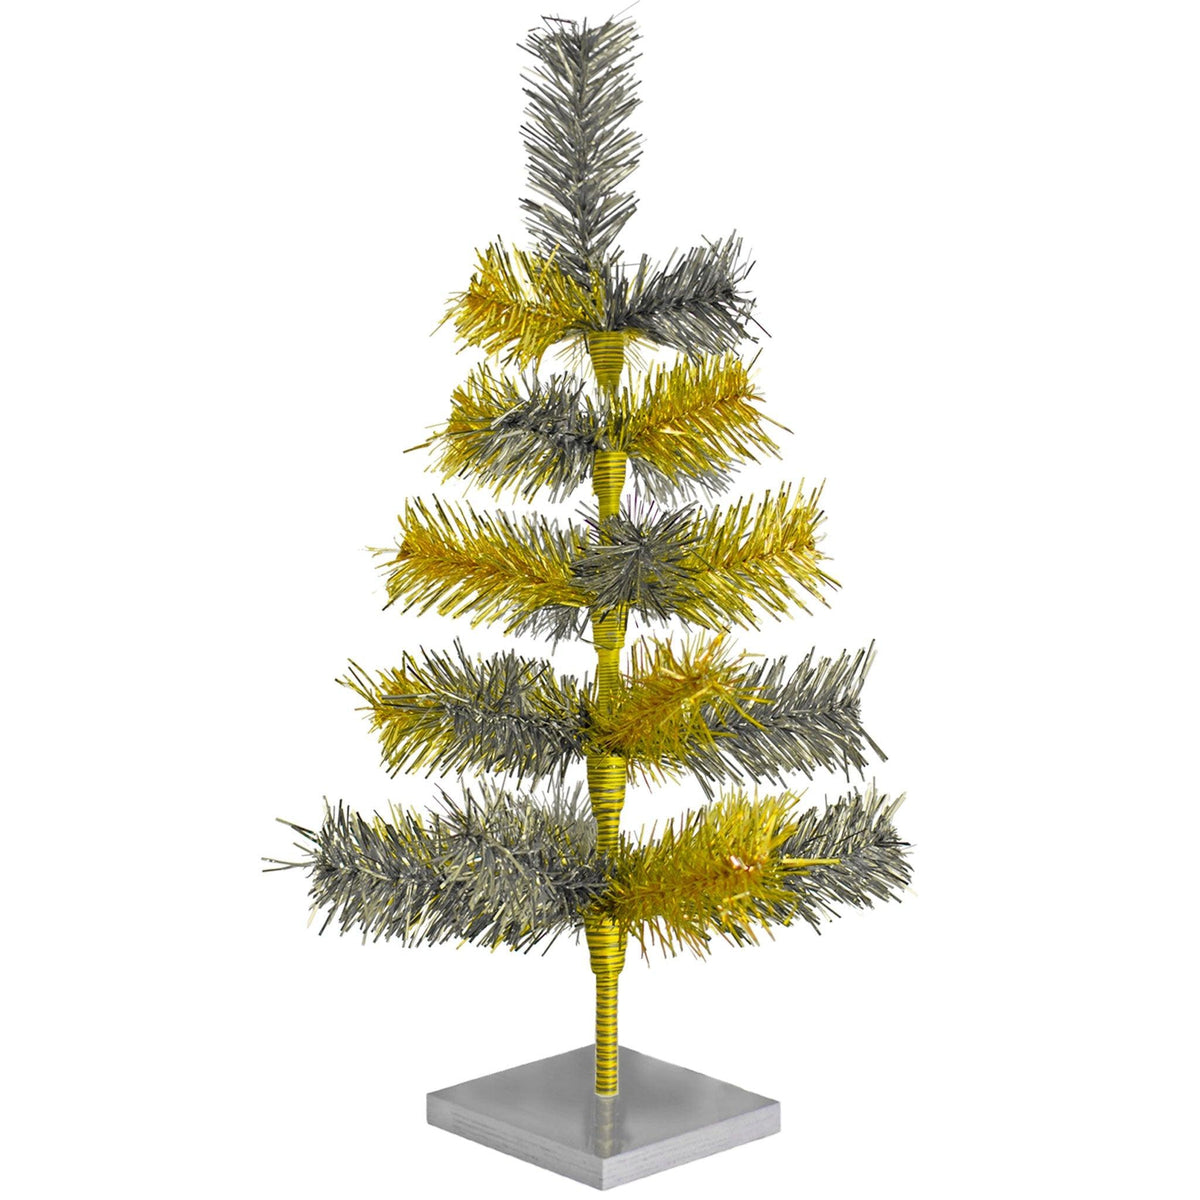 18in gold and silver multicolor tinsel christmas trees sold at leedisplay.com